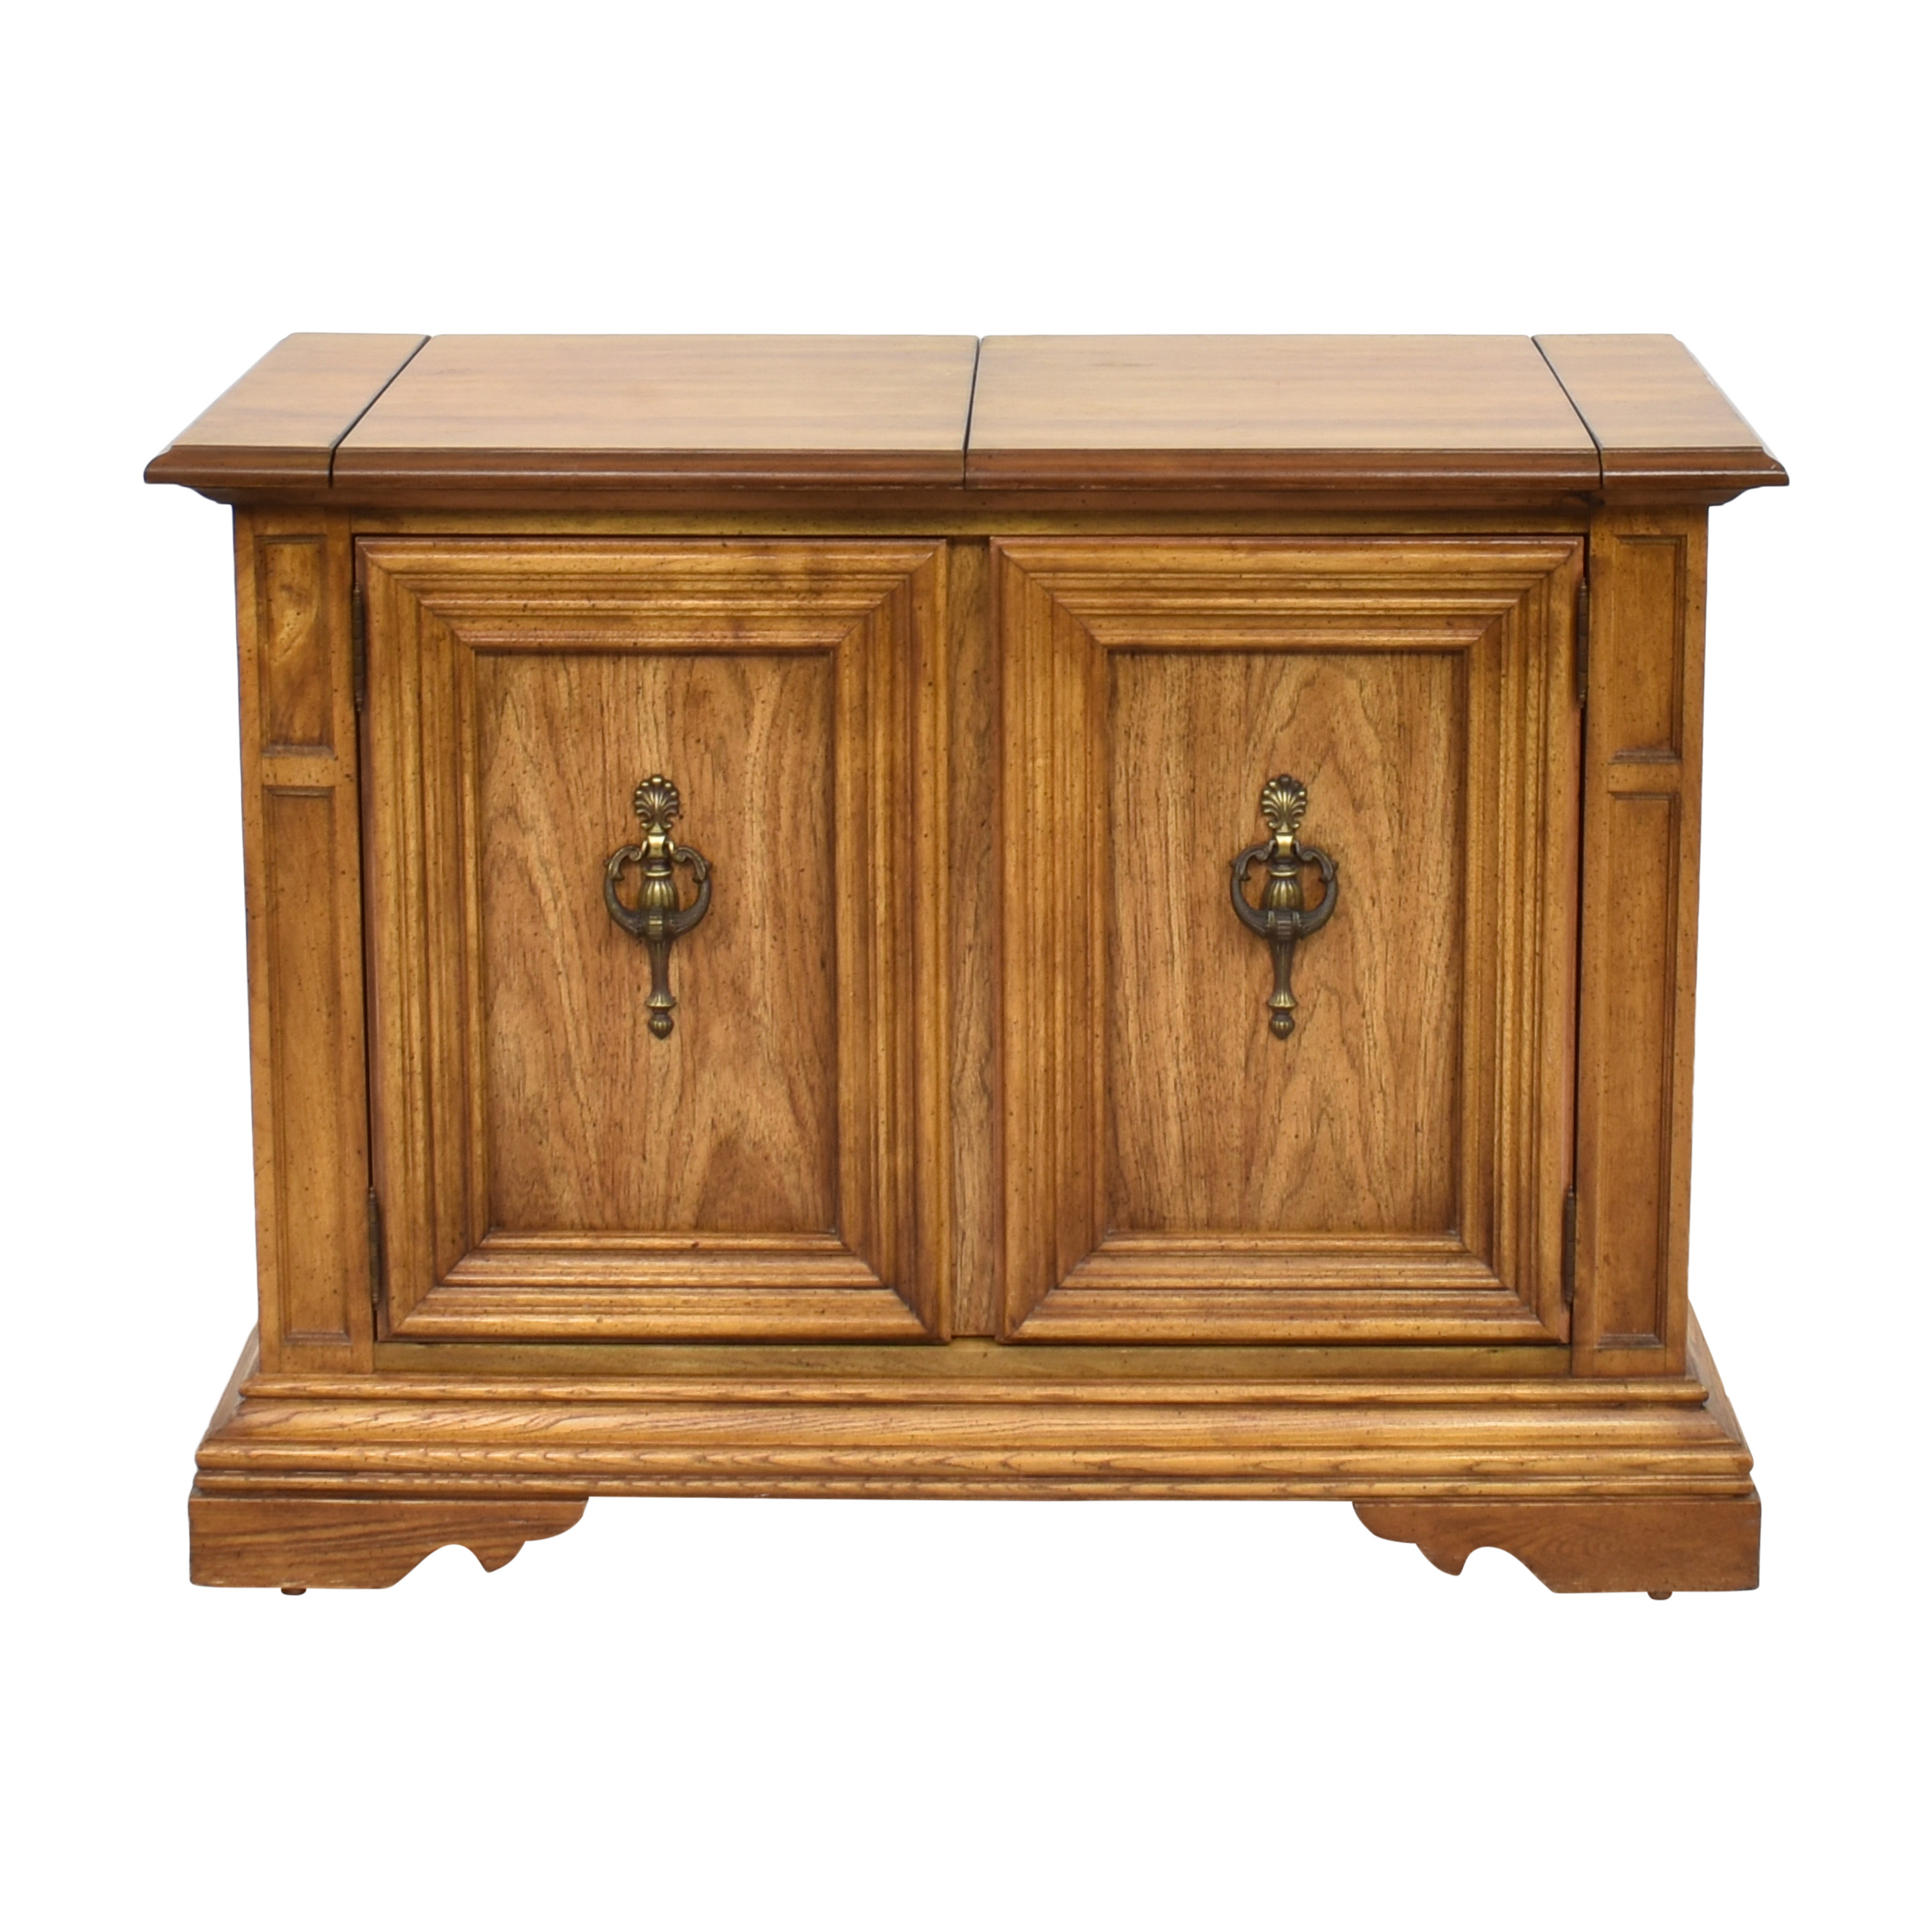 https://res.cloudinary.com/dkqtxtobb/image/upload/f_auto,q_auto:best/product-assets/441946/stanley-furniture/storage/cabinets-sideboards/stanley-furniture-traditional-flip-top-server-buffet.jpeg